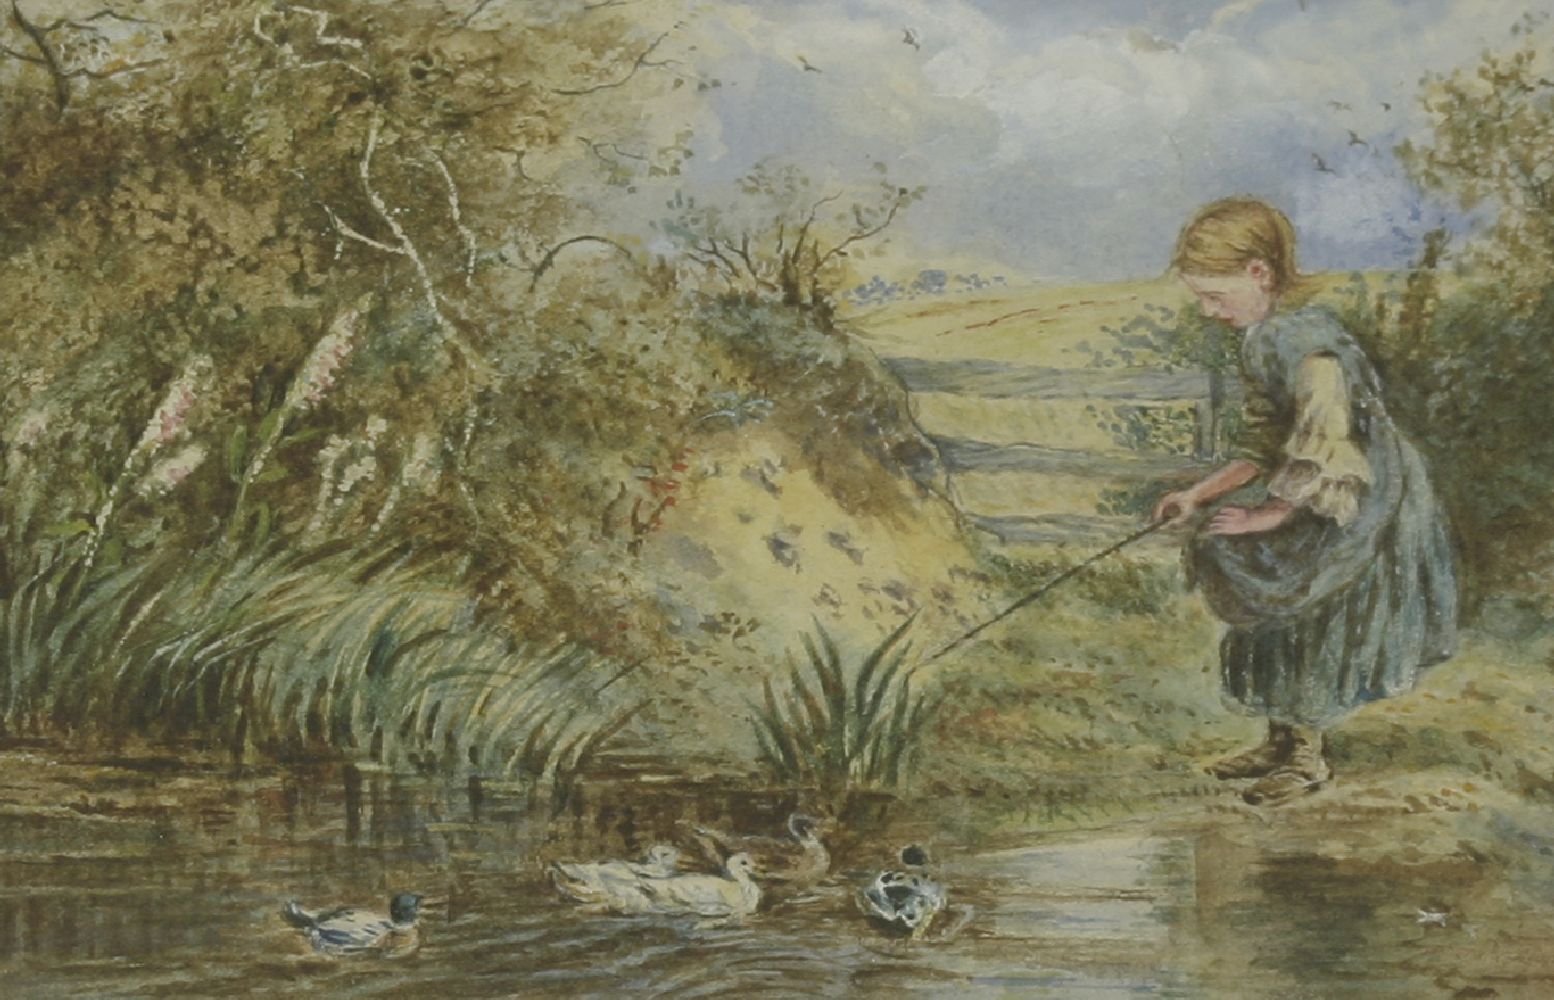 After Myles Birket FosterCHILDREN FISHING FROM A LOG BENCH;A GIRL FISHING WITH DUCKSTwo,